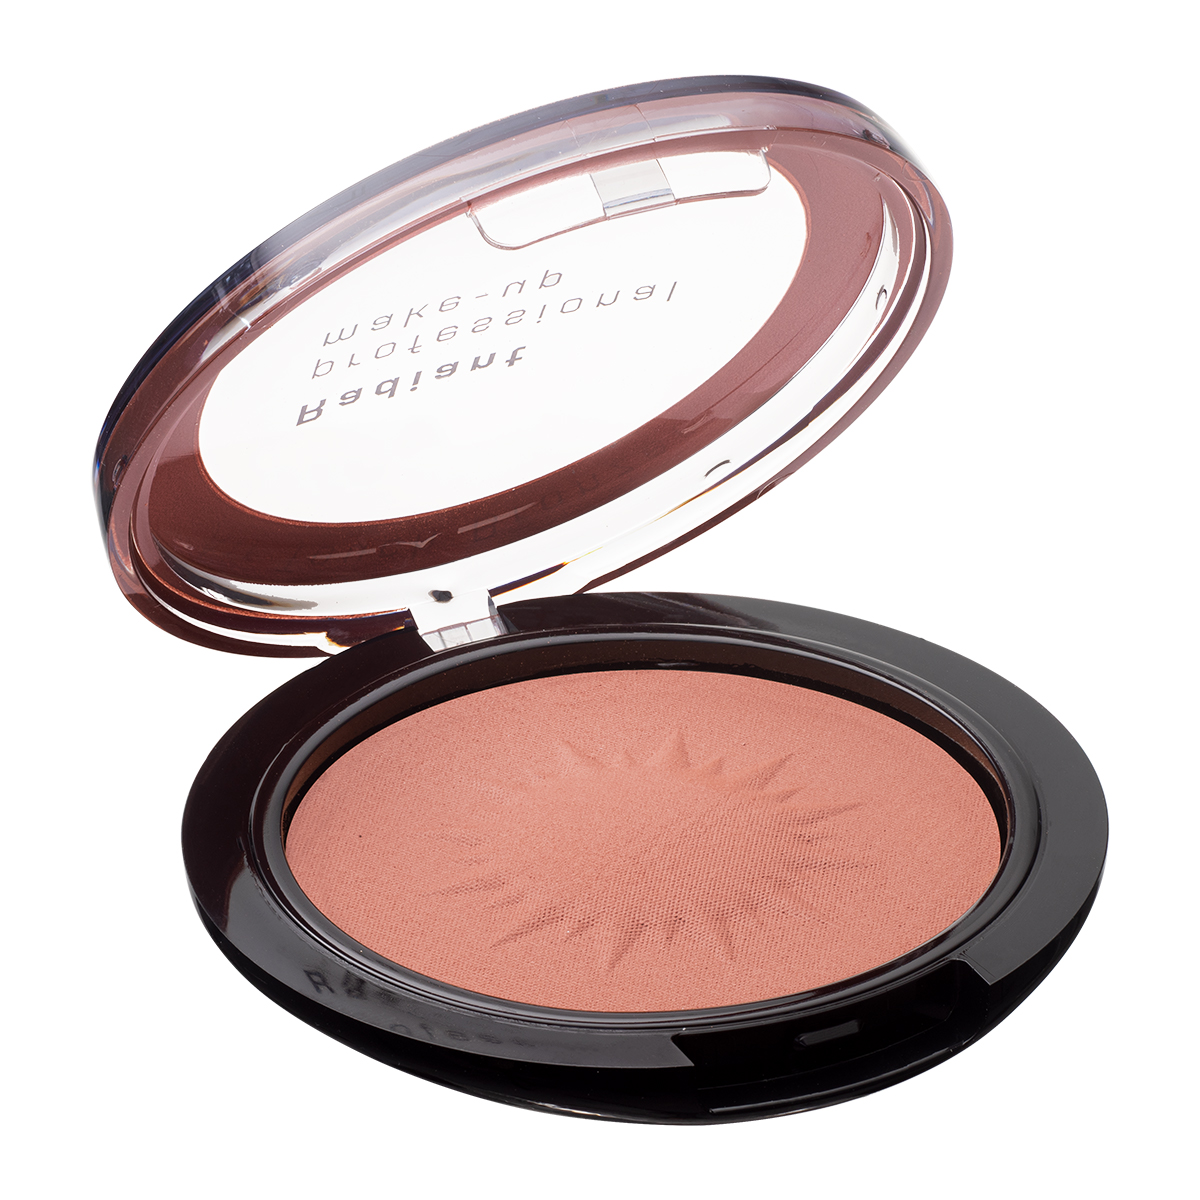 AIR TOUCH BRONZER No 02 "L.A. LIGHTS" Limited Edition